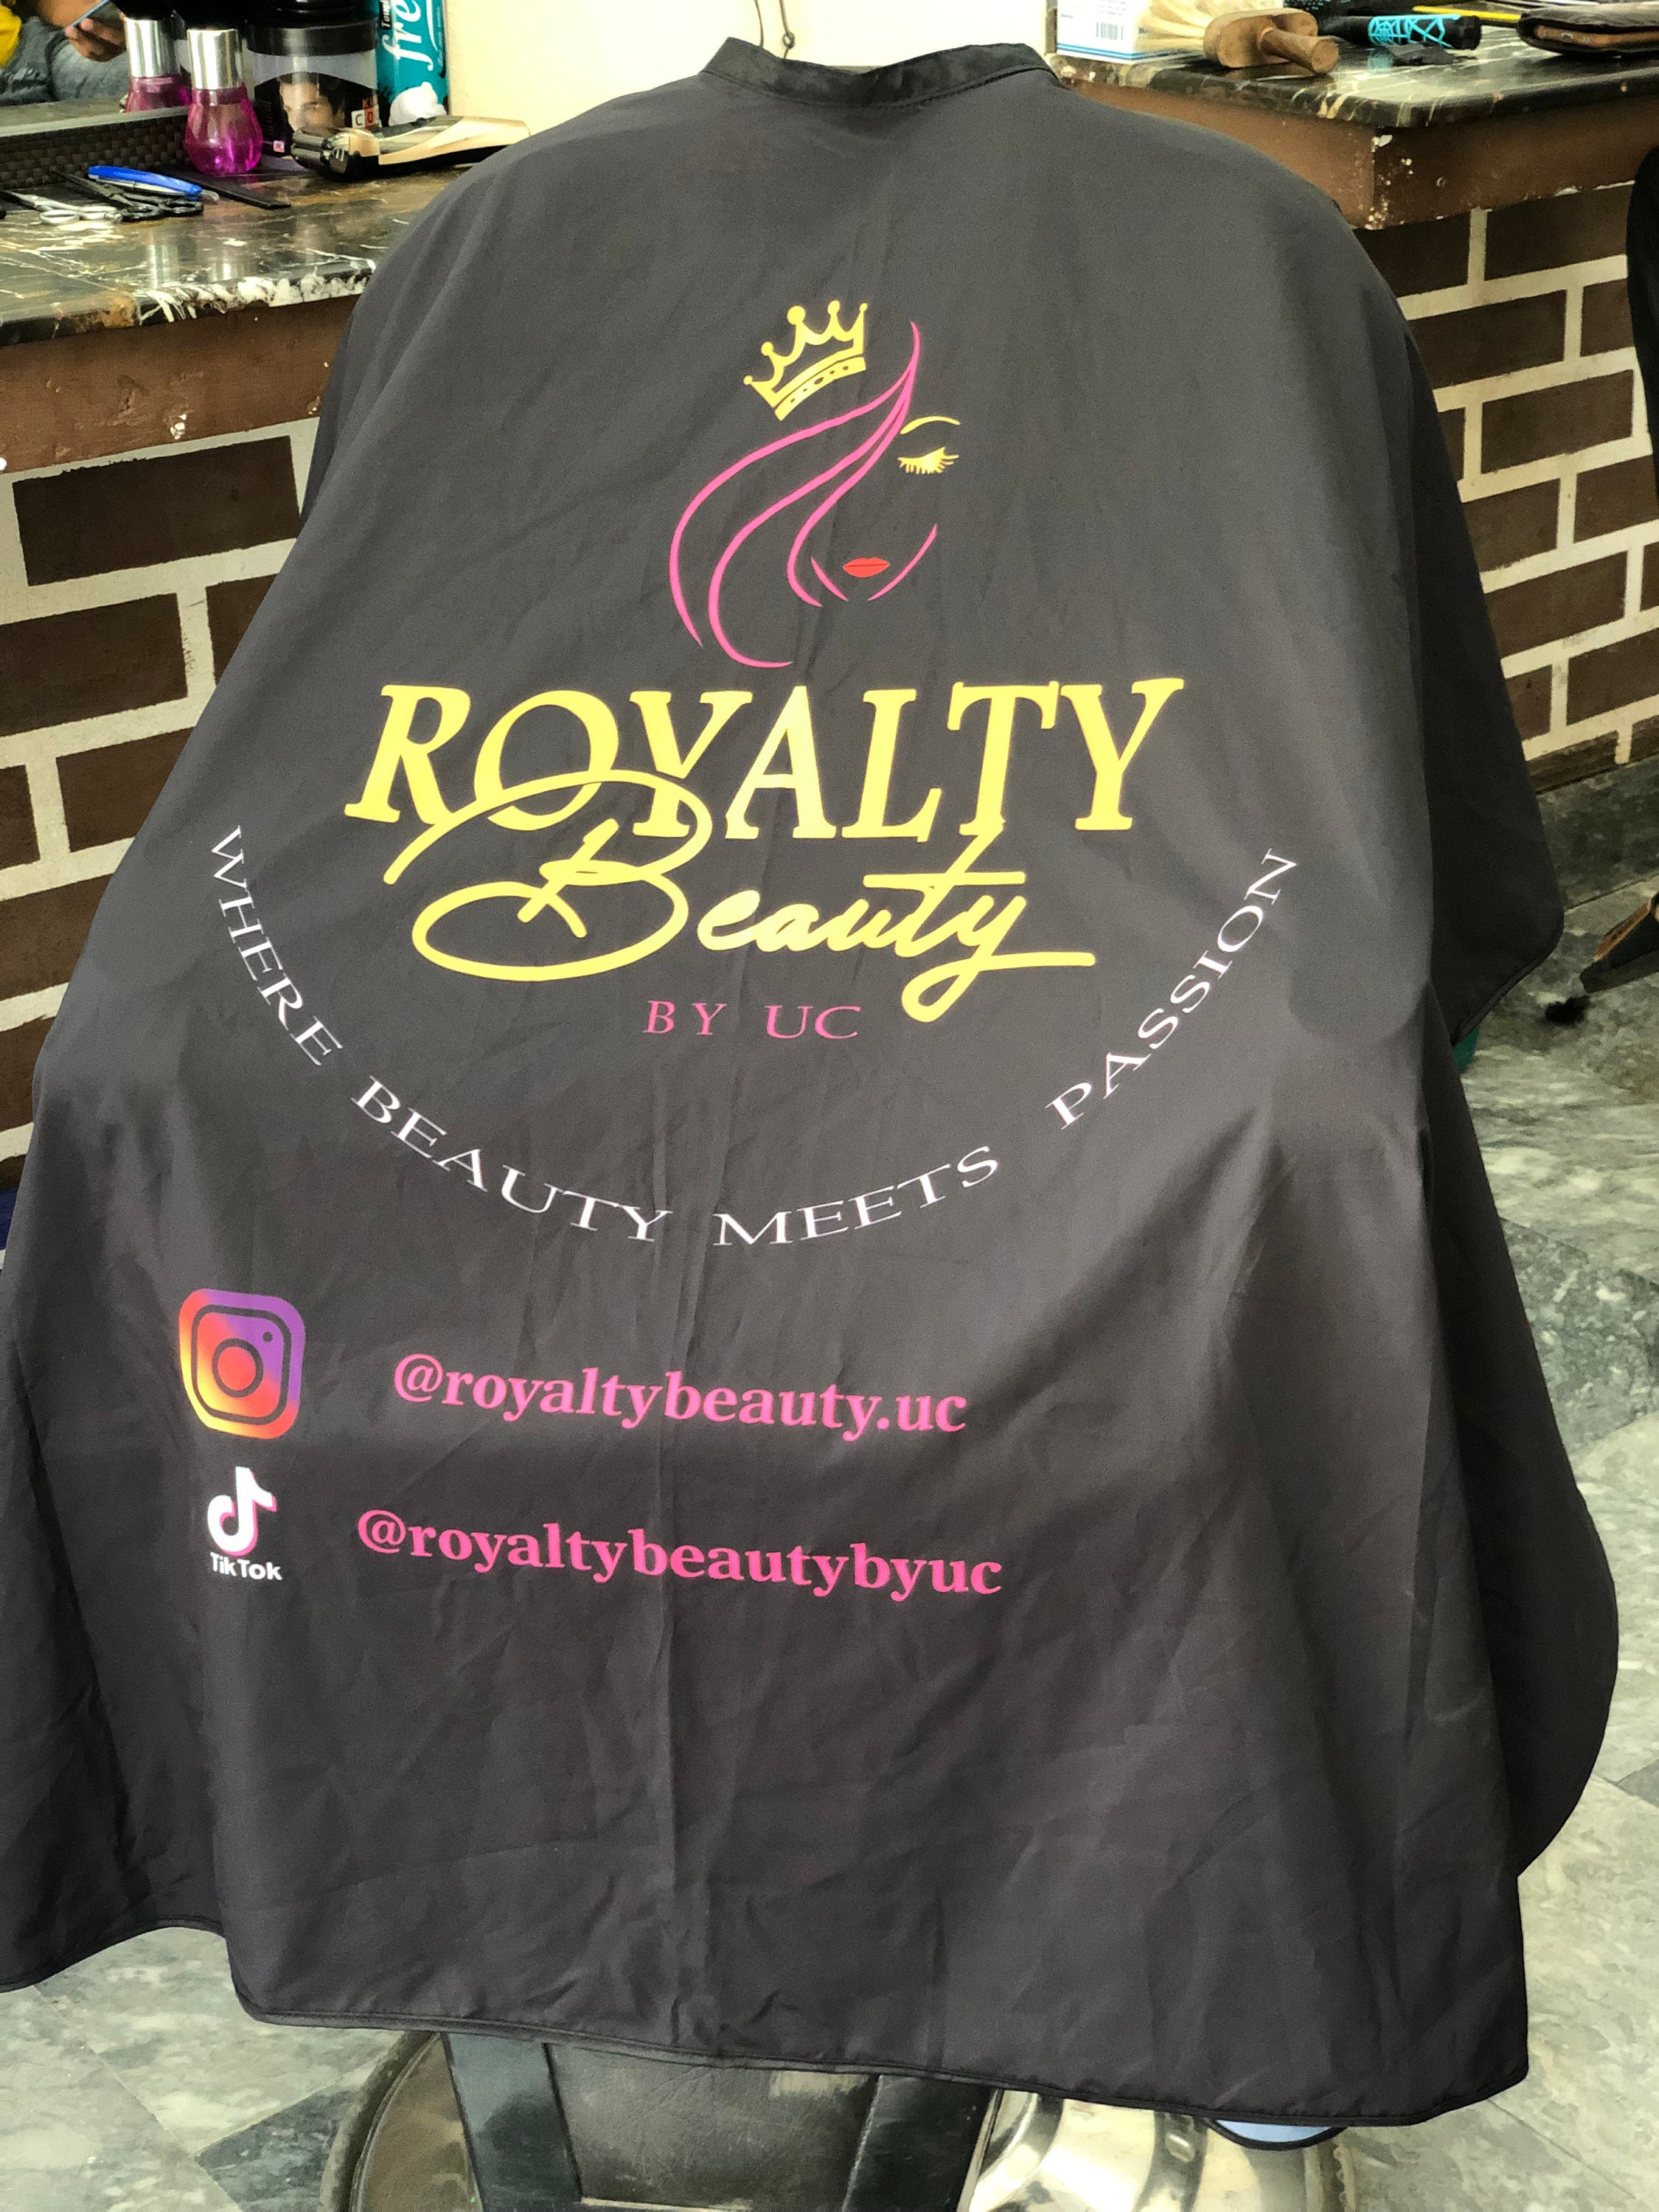 Custom Screen Printed Capes, Aprons, and Jackets for salons, barber shops  and beauty and barber schools